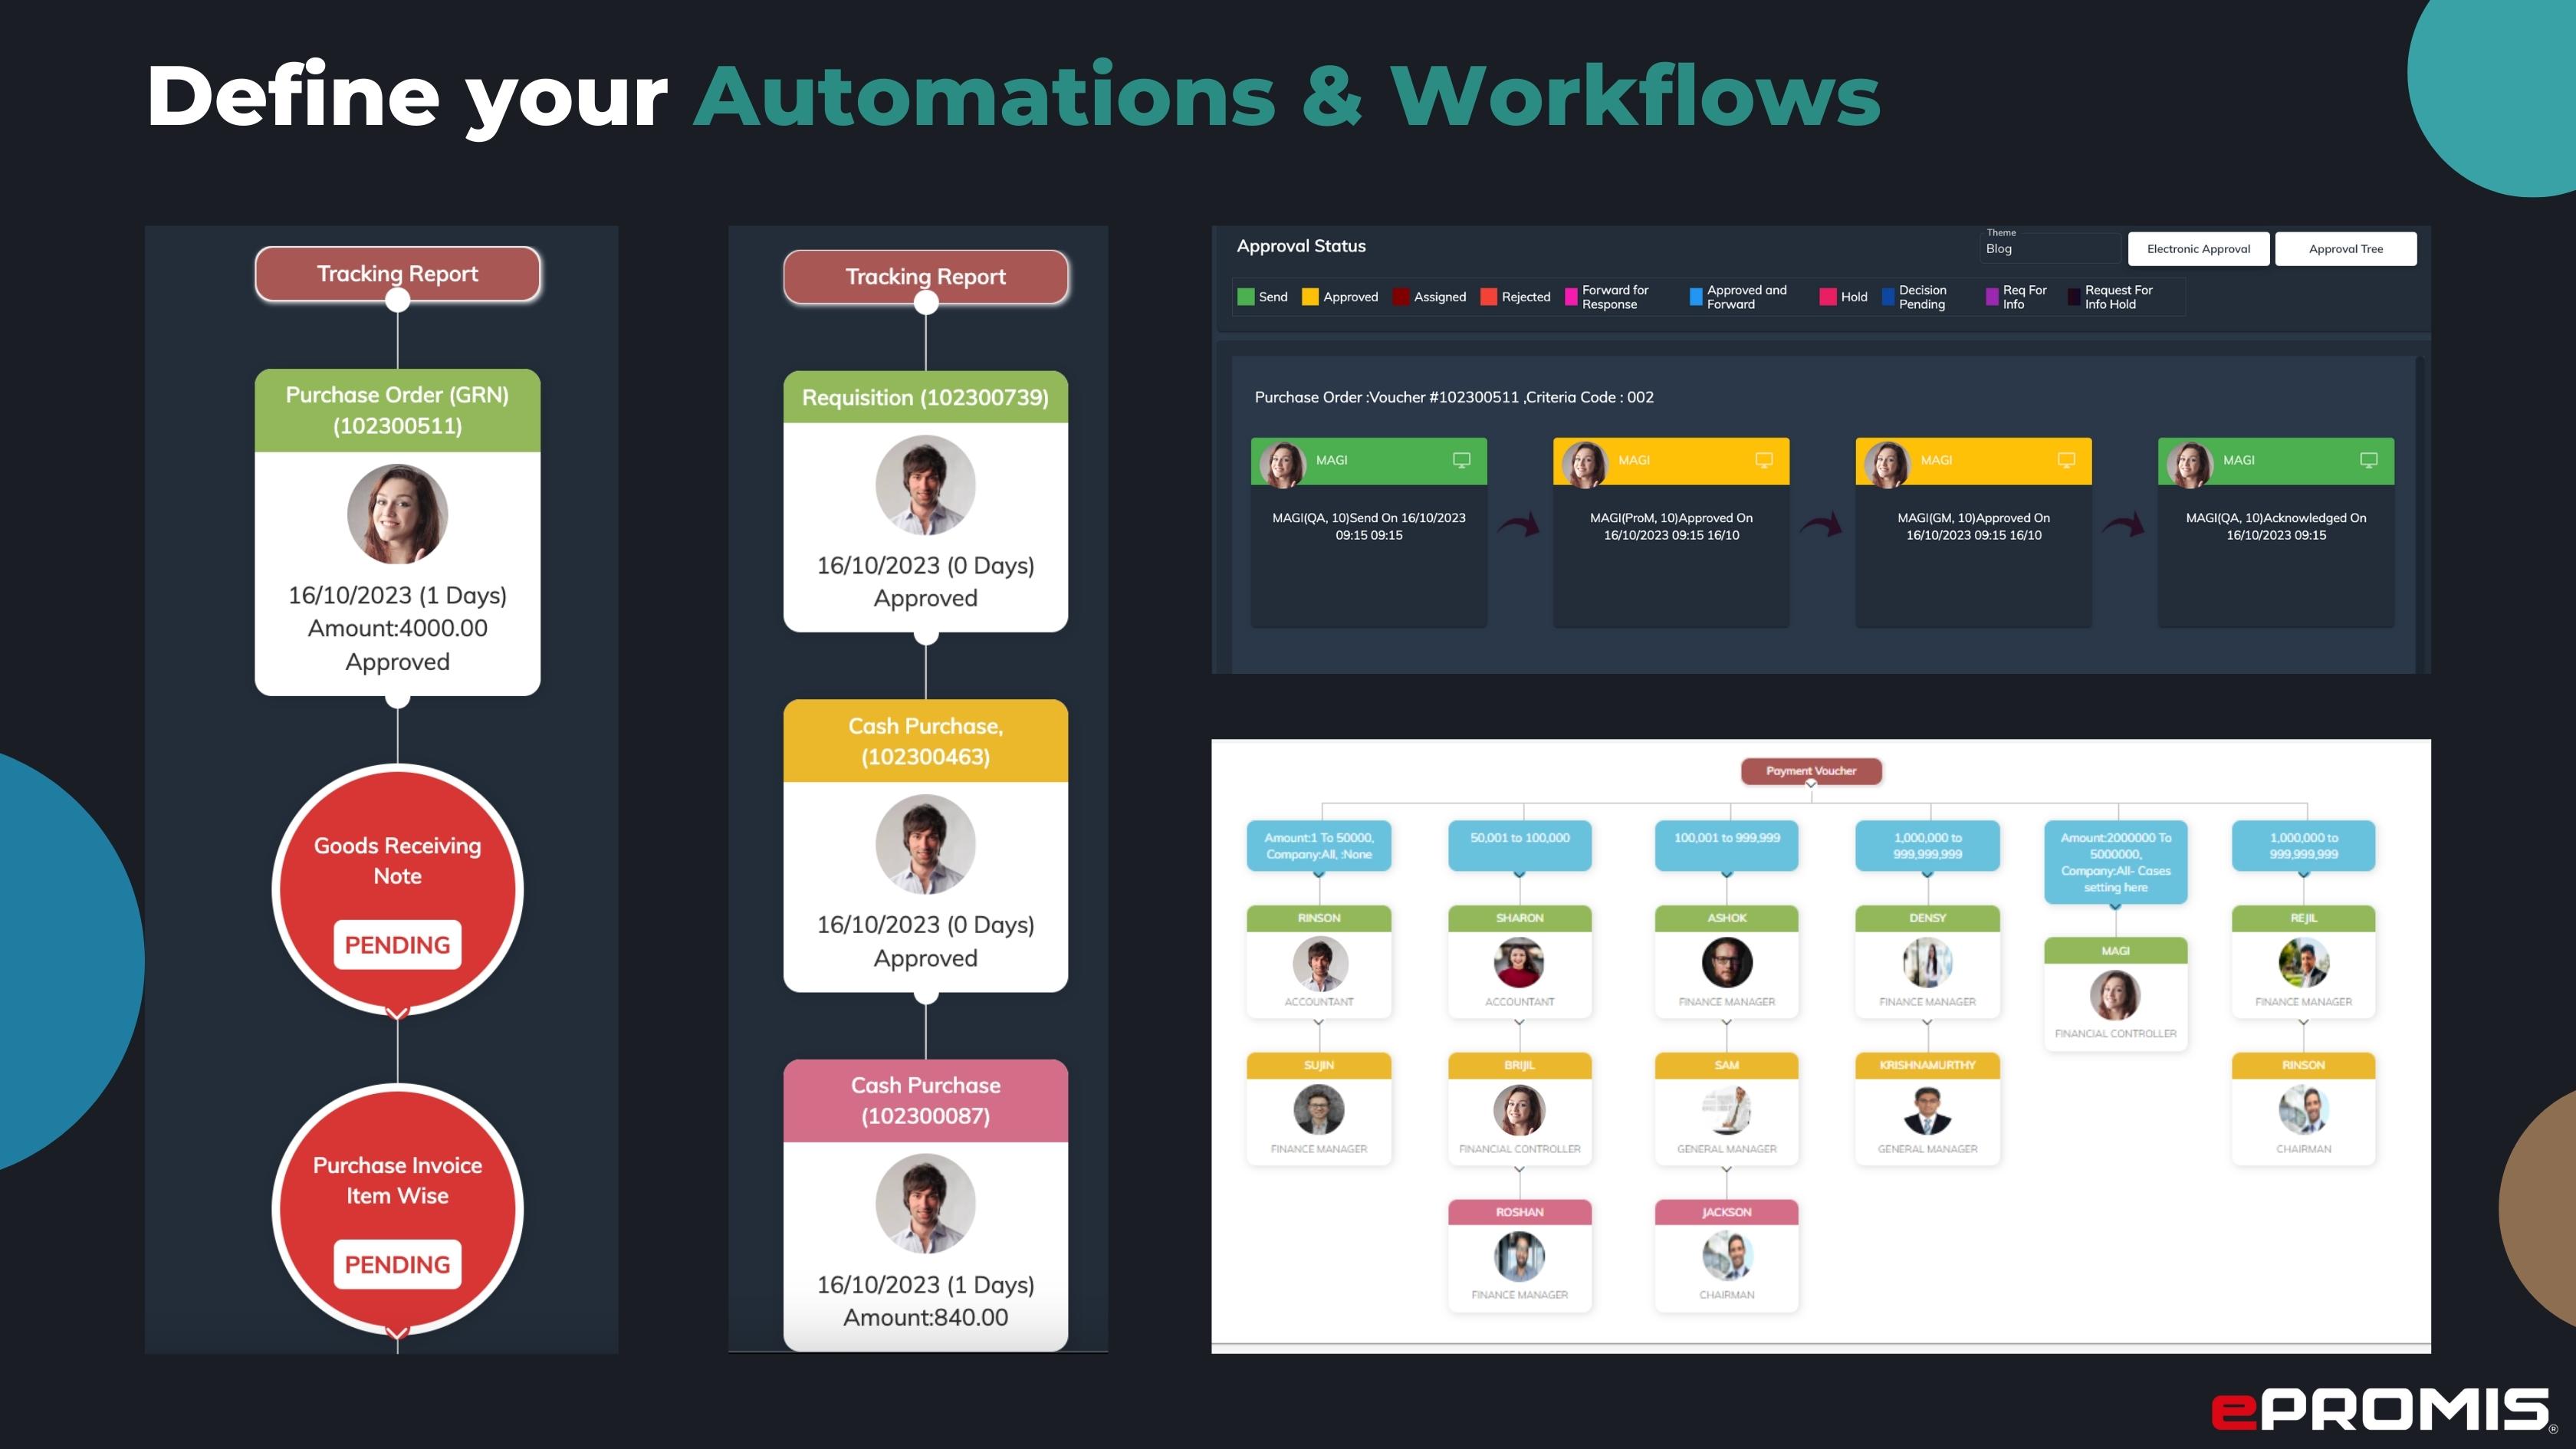 Define your Automations and Workflows